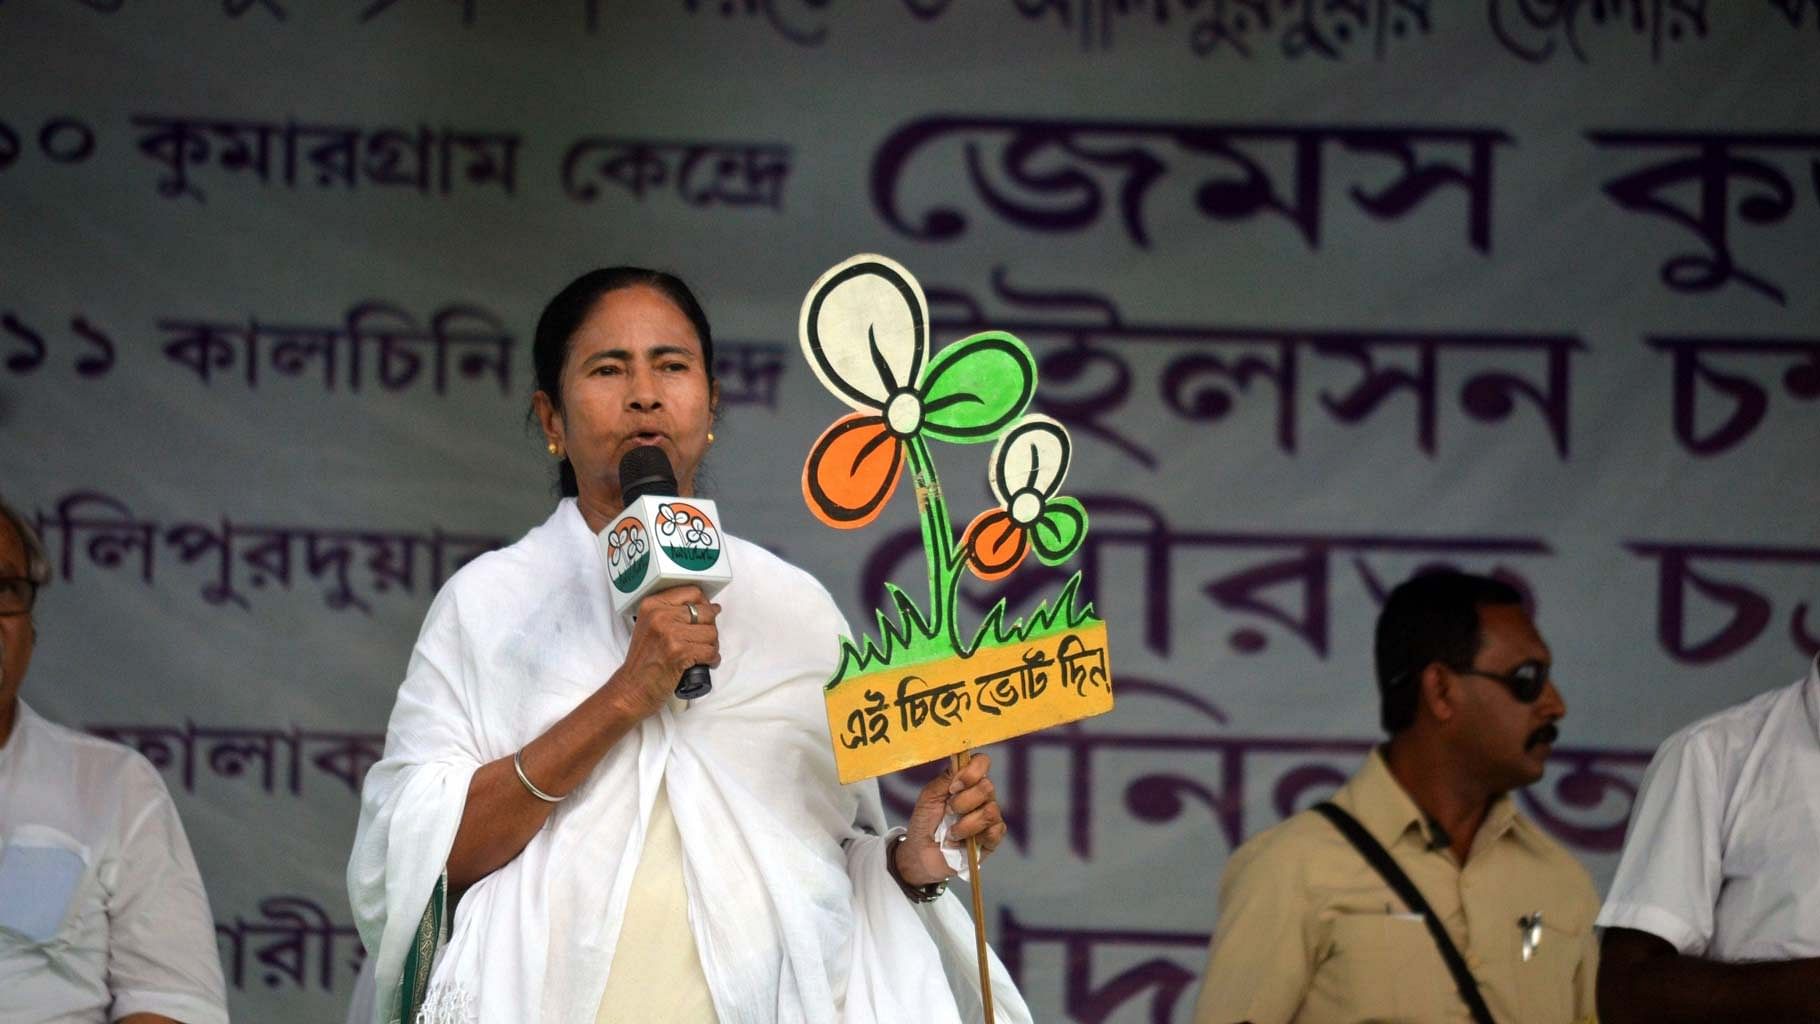 West Bengal Chief Minister and TMC supremo Mamata Banerjee at a rally in Alipurduar of West Bengal on 12 April 2016. (Photo: IANS)